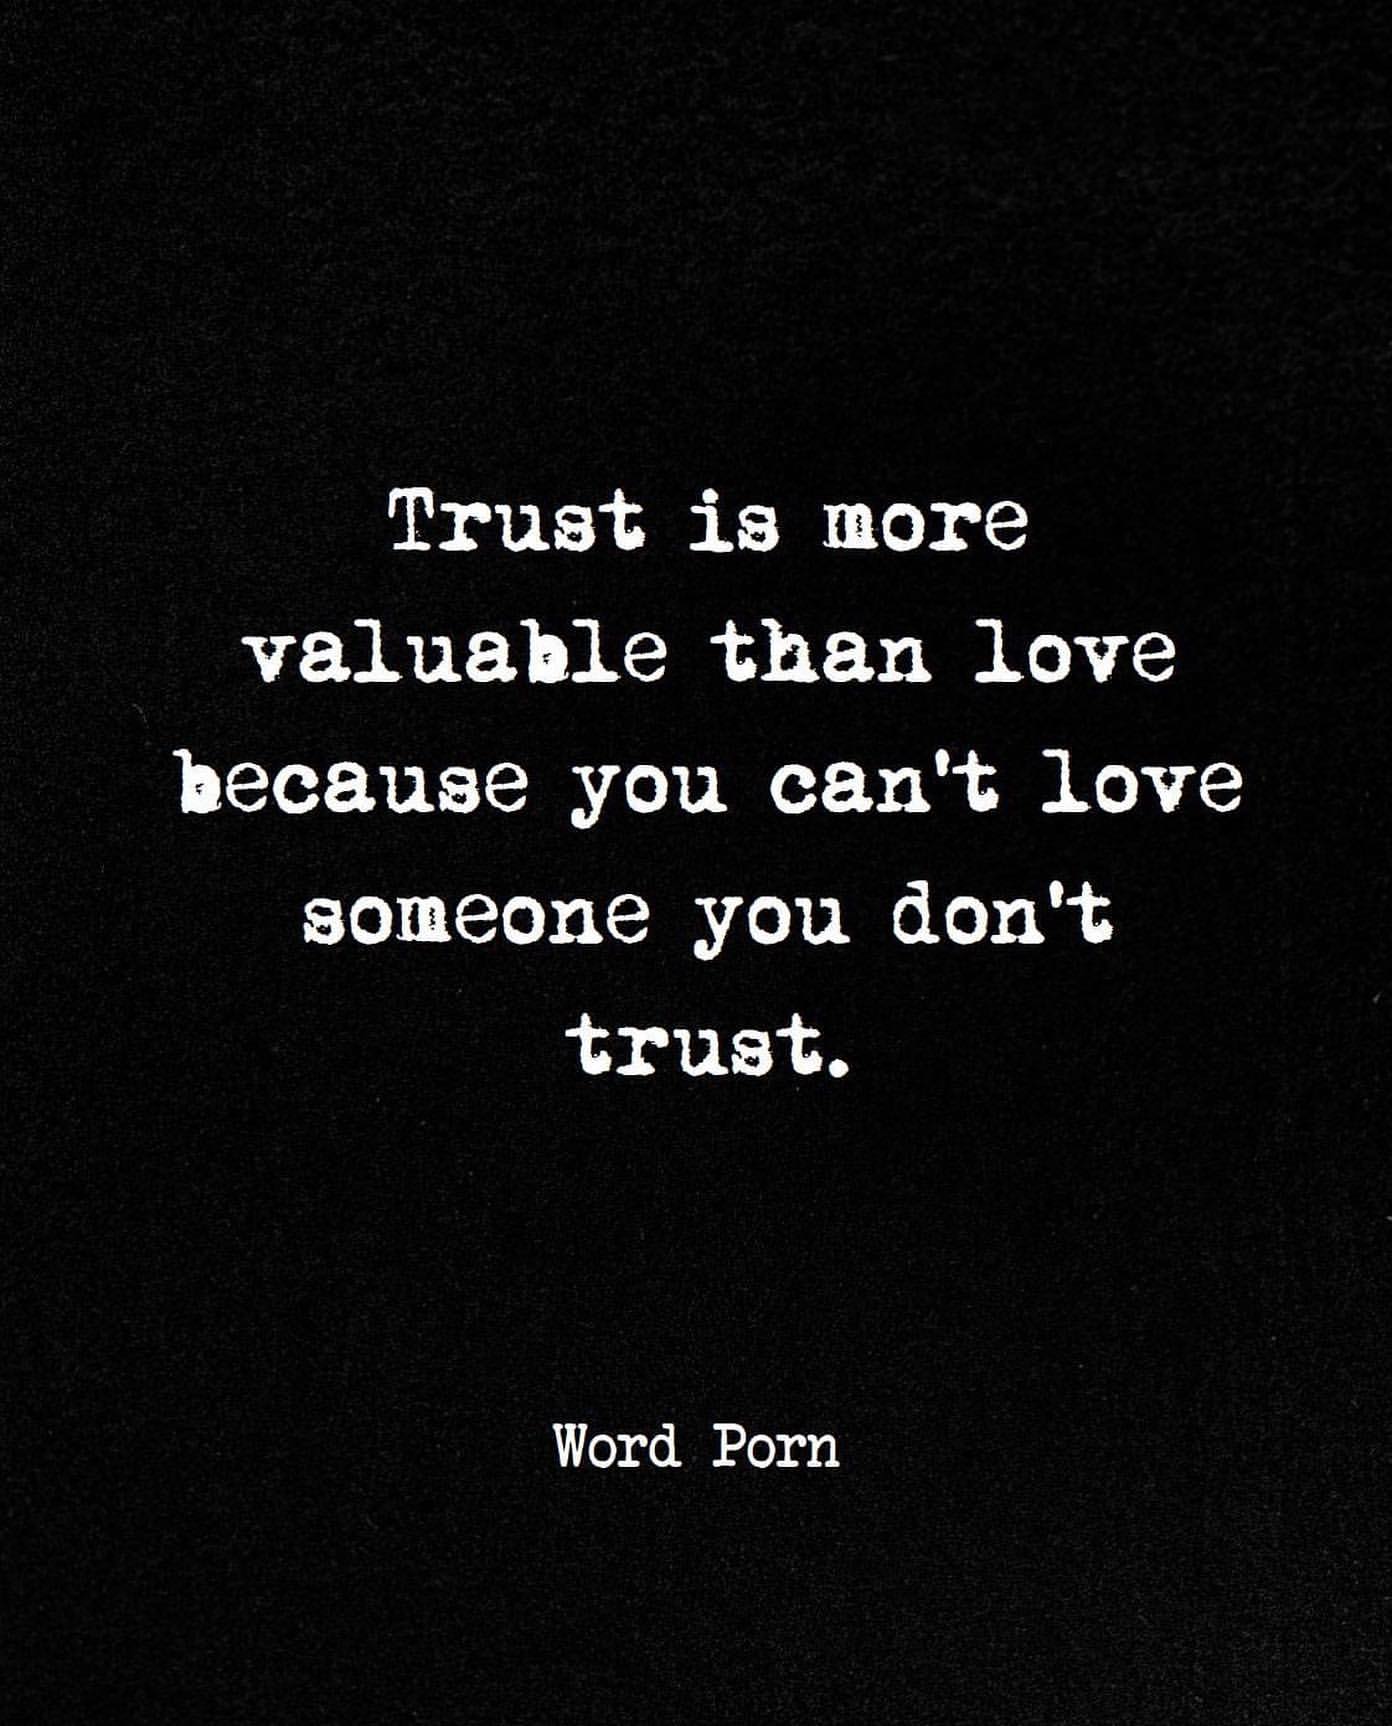 Trust is more valuable than love because you can't love someone you don't trust.